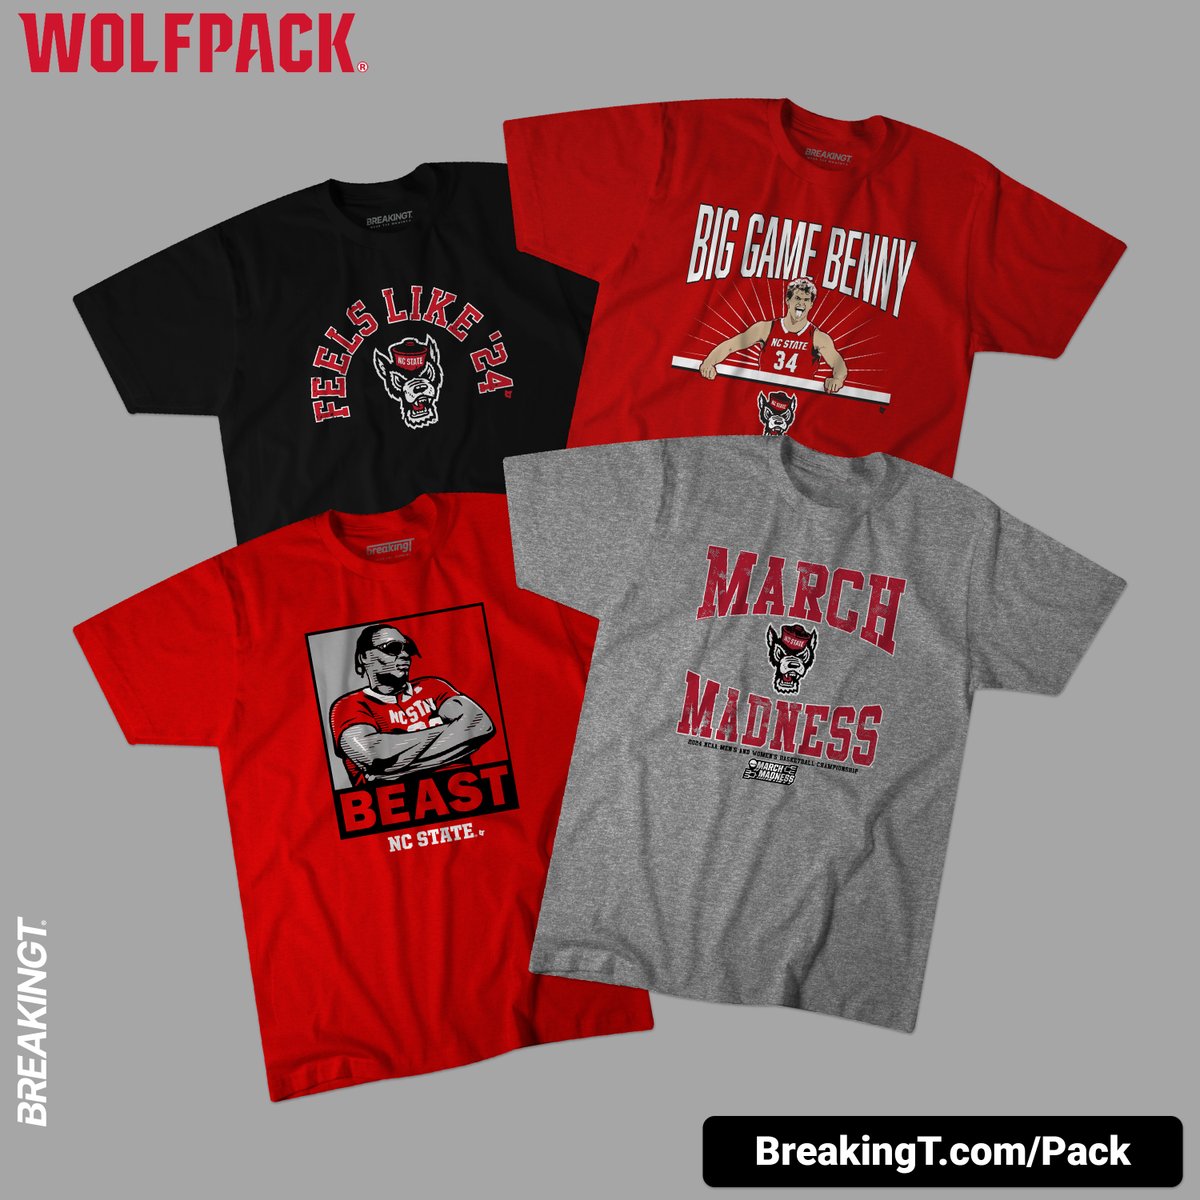 🏀 WOLFPACK FLASH SALE 🏀 24% off top NC State Hoops shirts! Check 'em out at BreakingT.com/Pack #WPN Hurry, supplies are limited - once they're gone, they're gone!